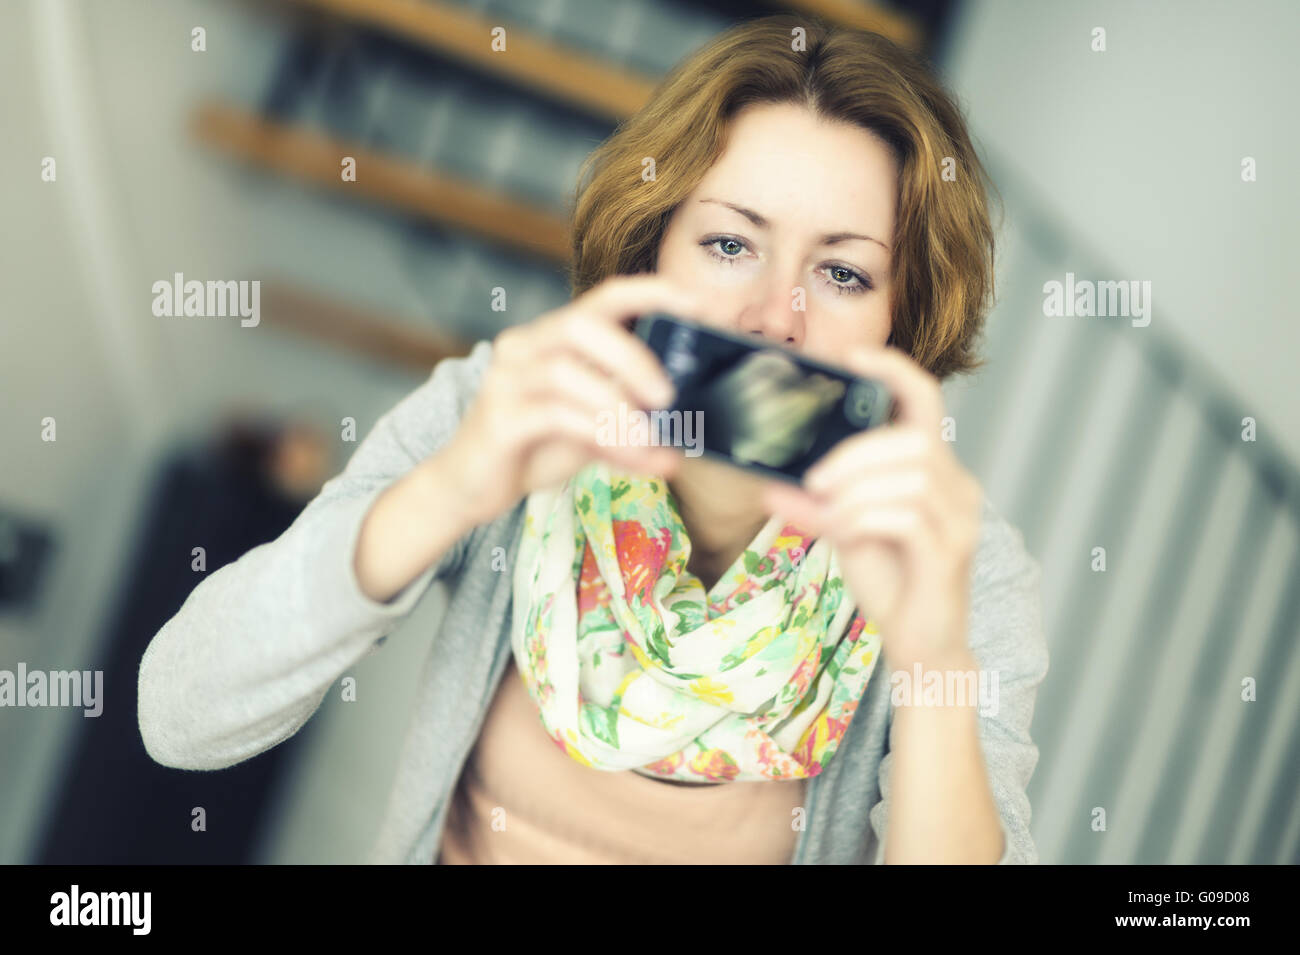 Young woman photographed with a smartphone Stock Photo